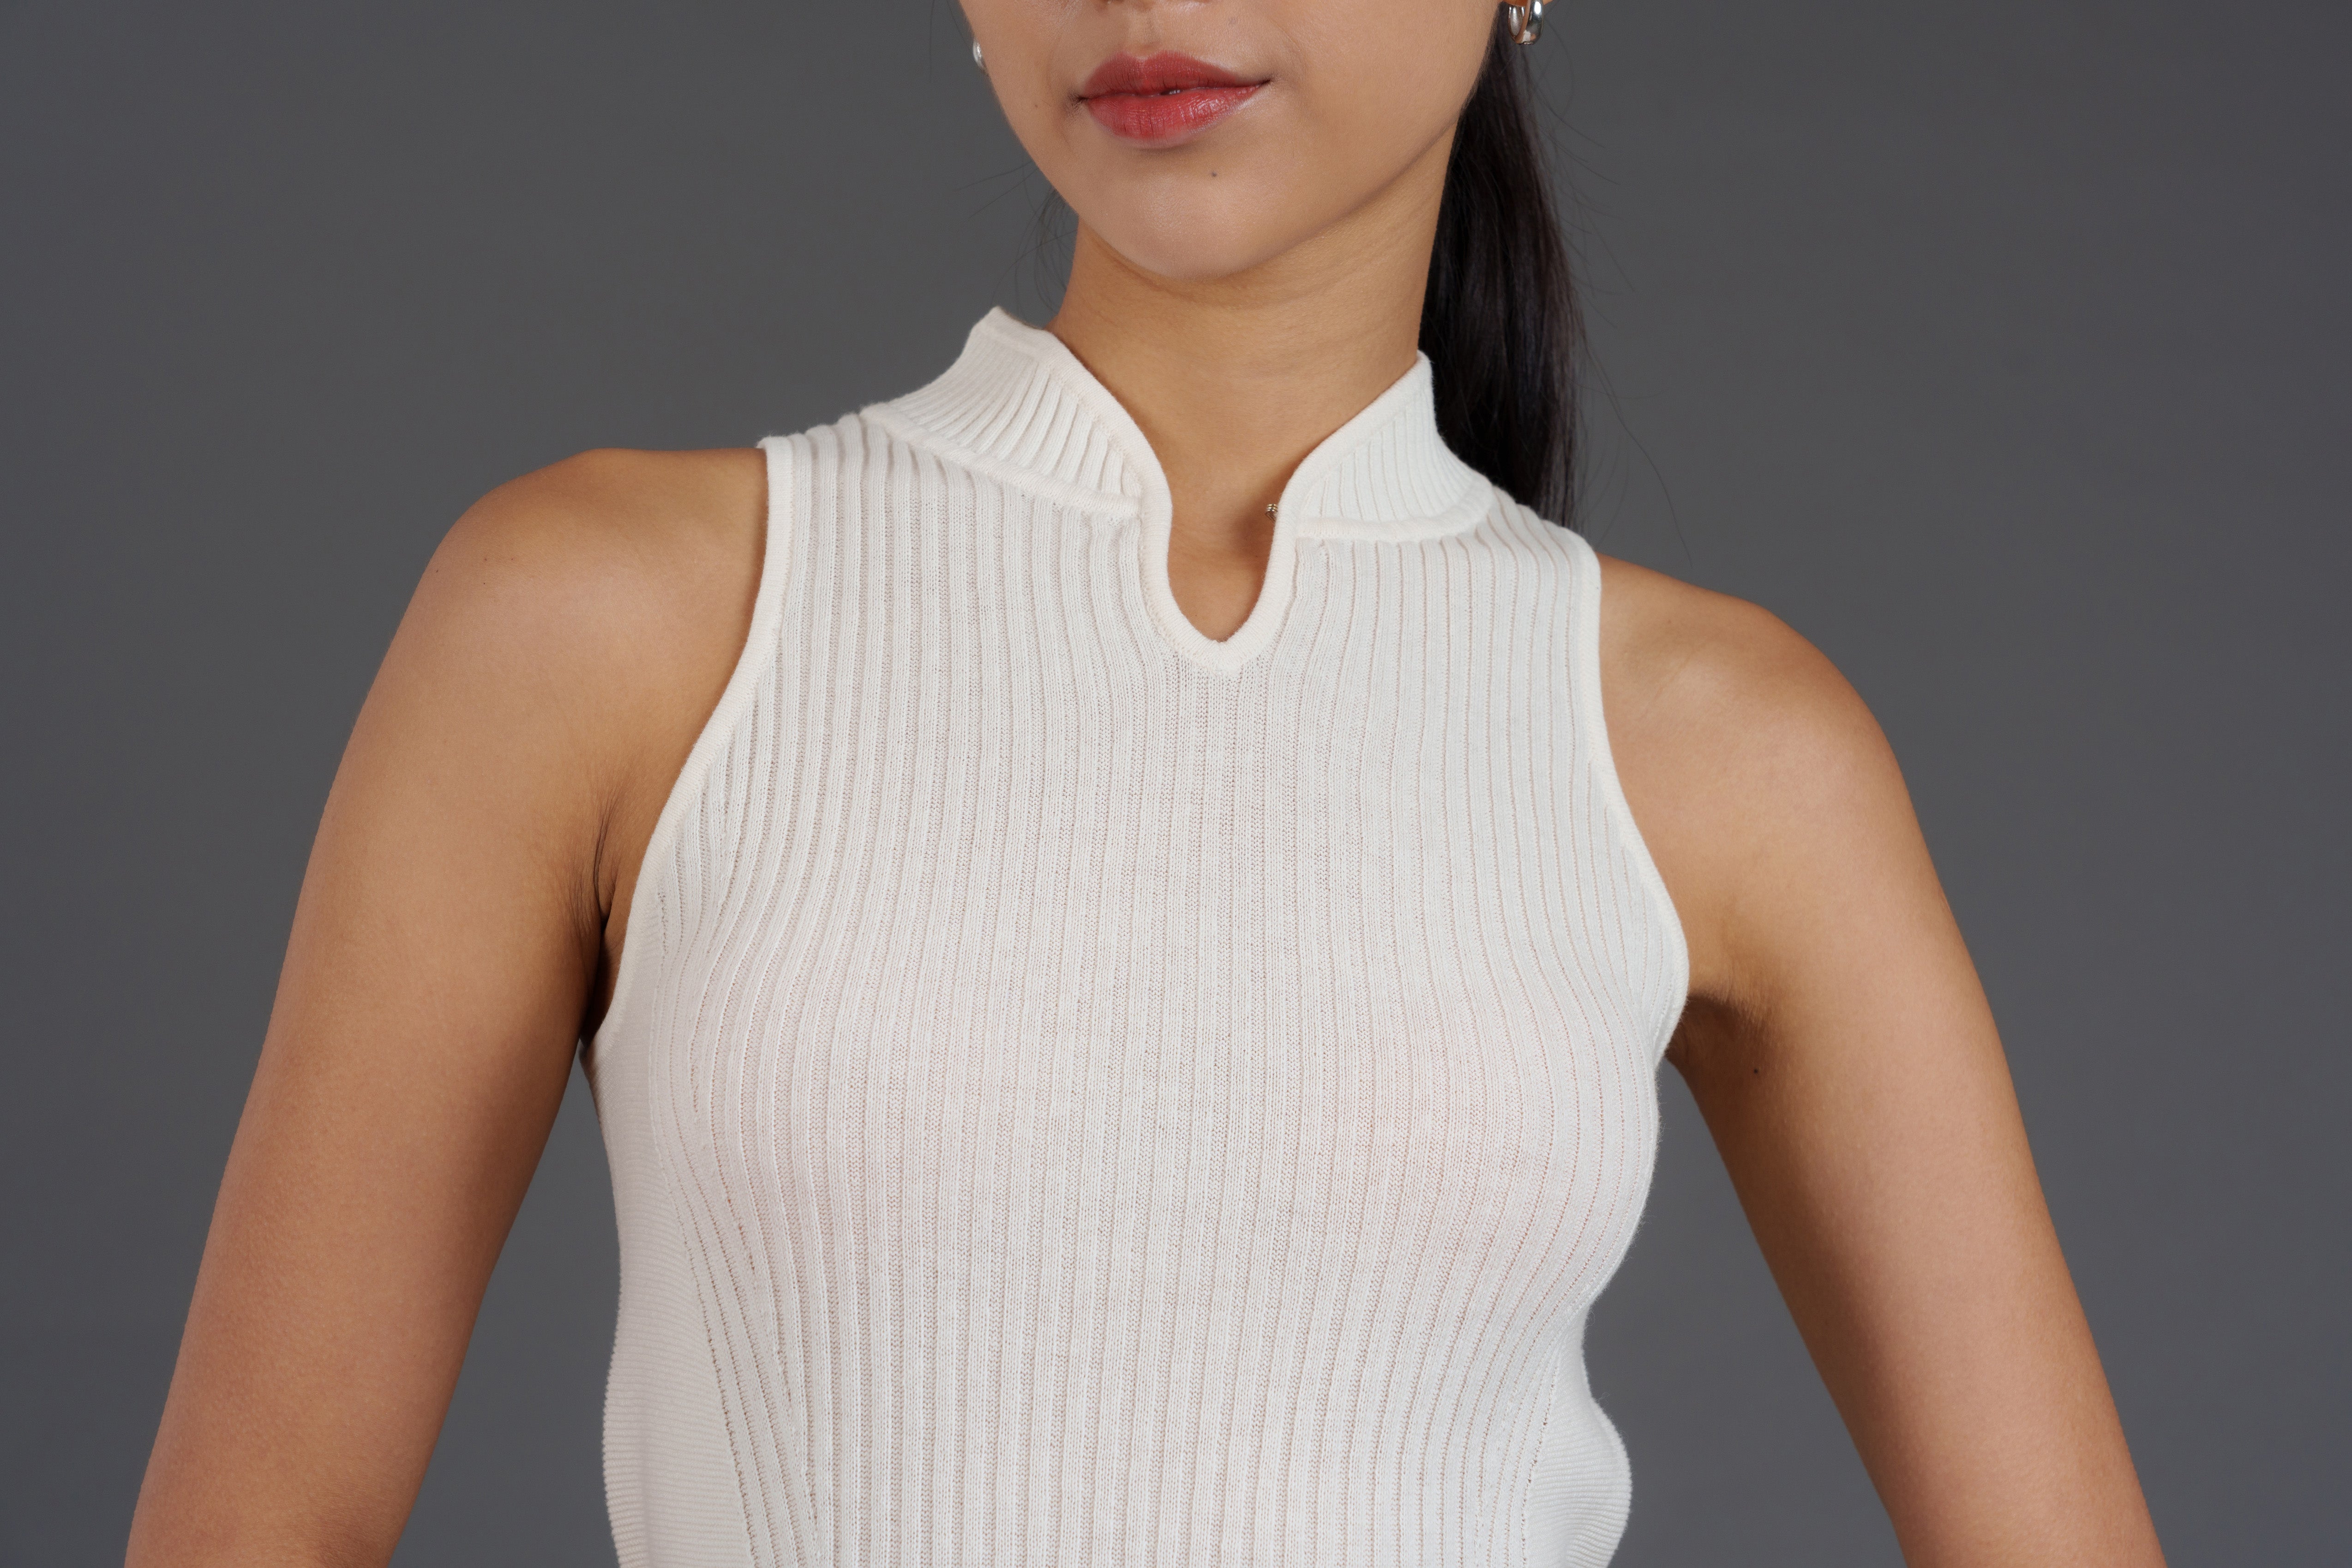 Knitted Qipao Tunic Top (White)